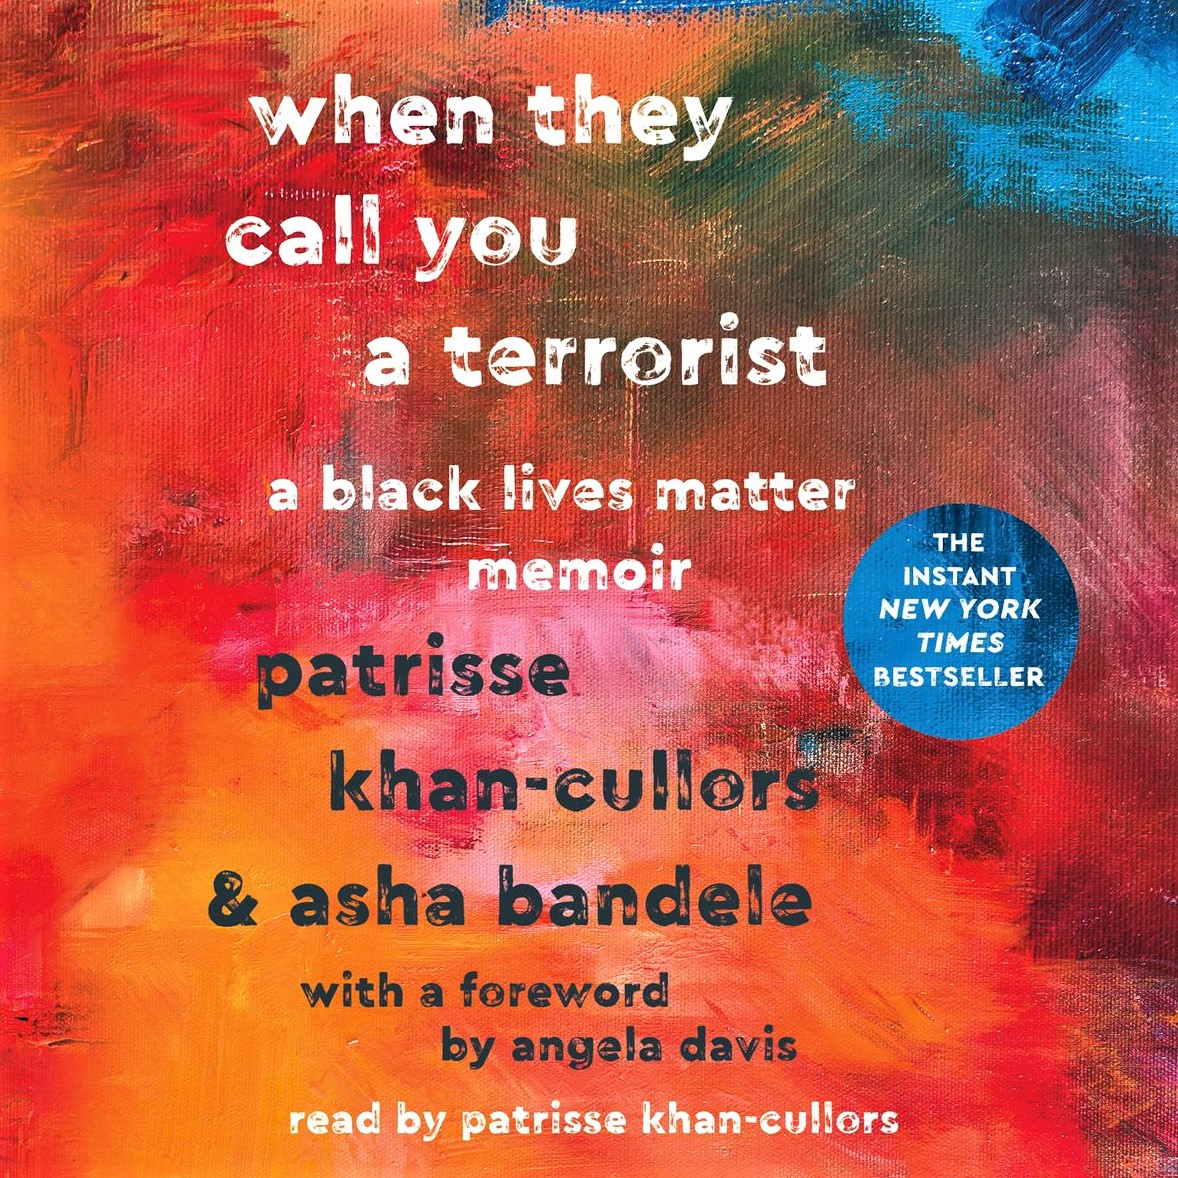 Cover image for UCSB Reads 2021 book selection: 'When They Call You a Terrorist'